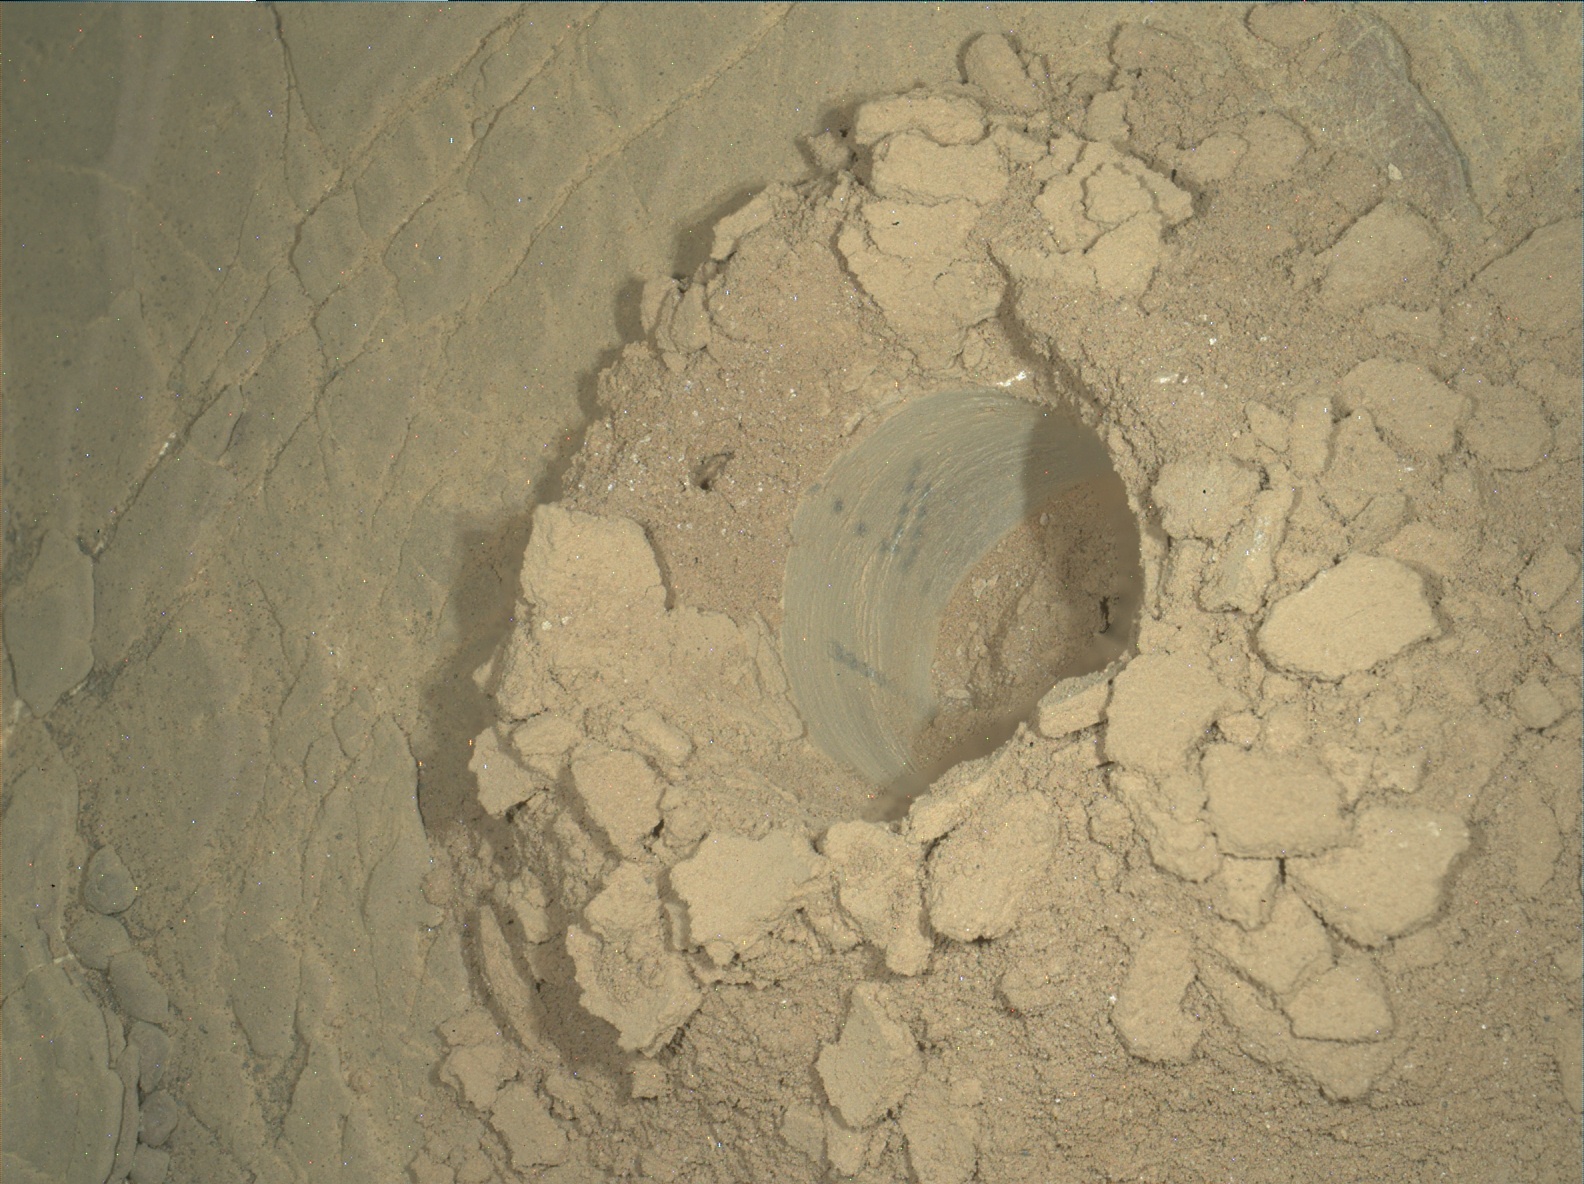 Nasa's Mars rover Curiosity acquired this image using its Mars Hand Lens Imager (MAHLI) on Sol 2529